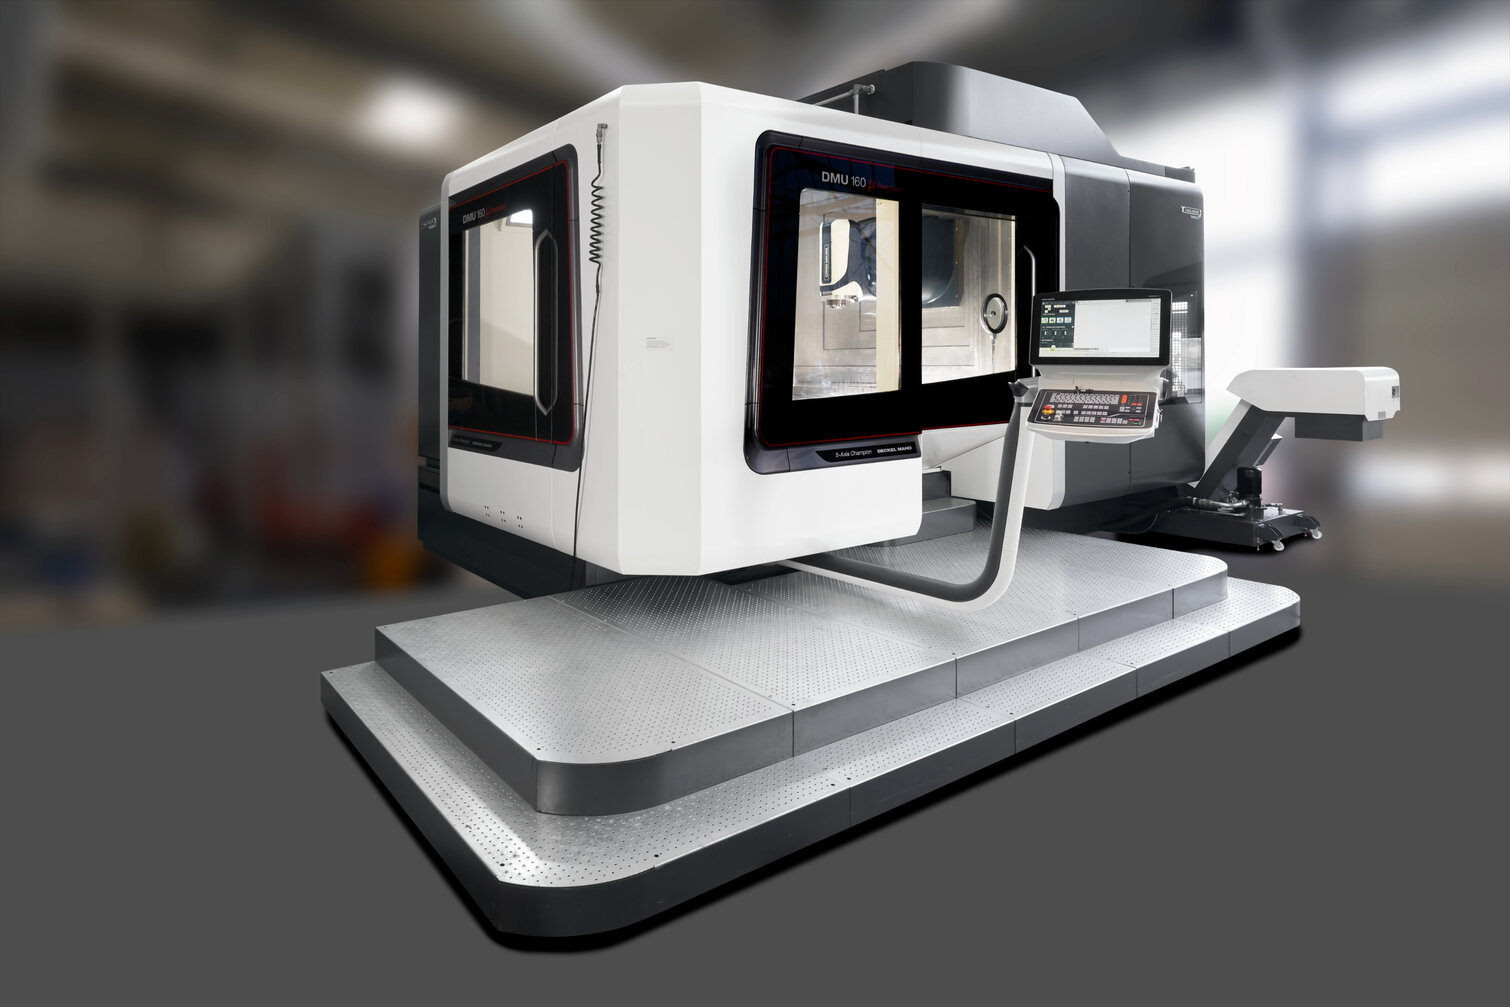 DMU 160 5-axis milling machine for ceramic finishing by Schunk Technical Ceramics